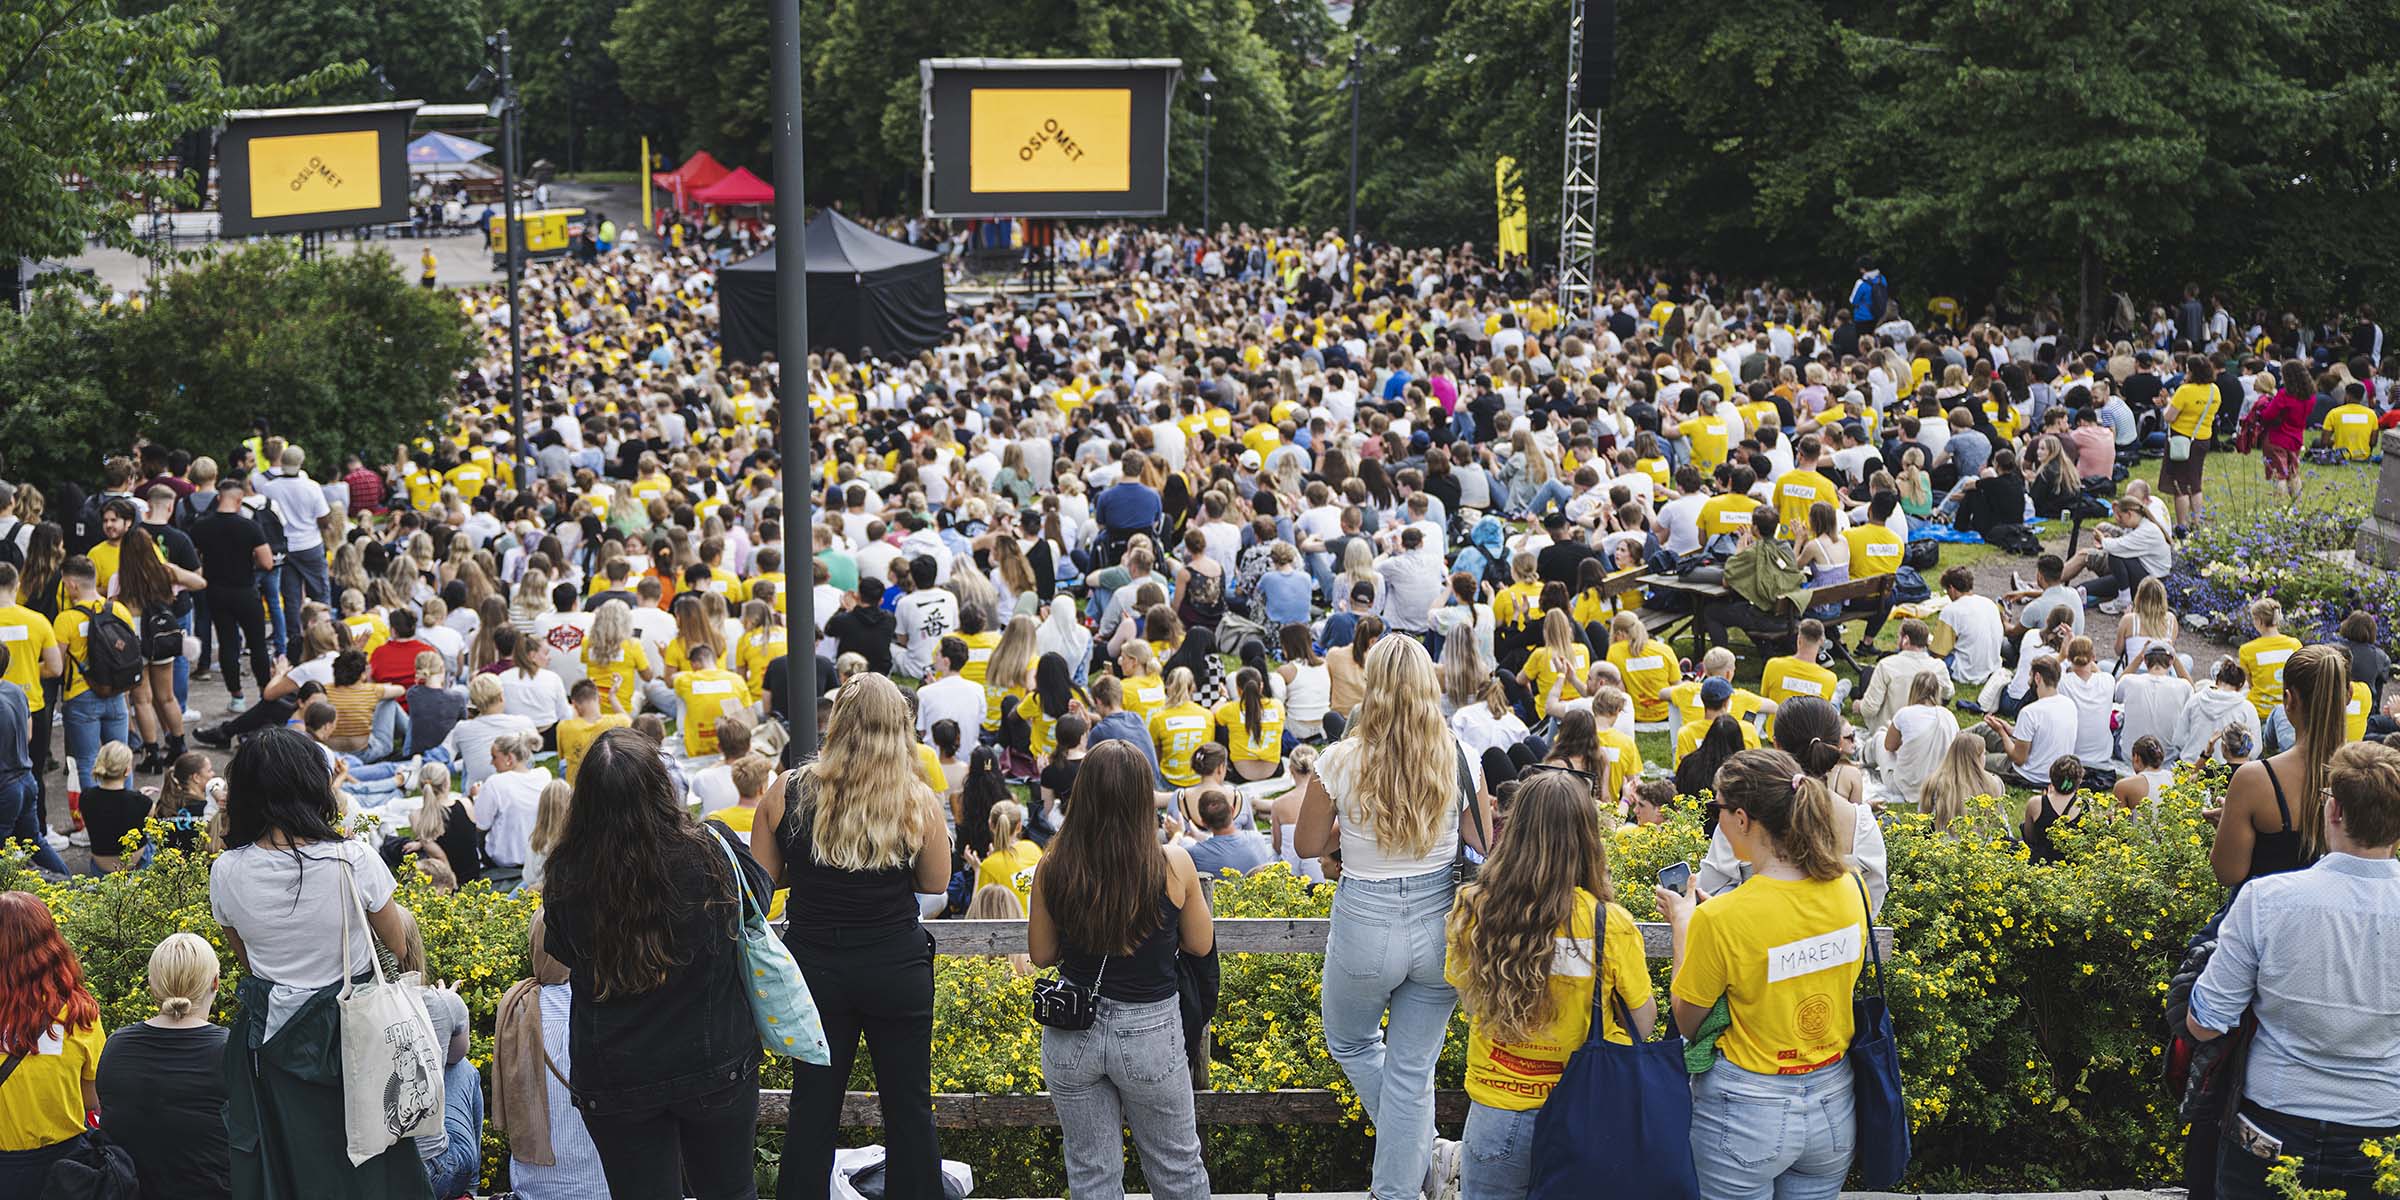 Many new students and buddies gathered for the opening ceremony at St. Hanshaugen park.